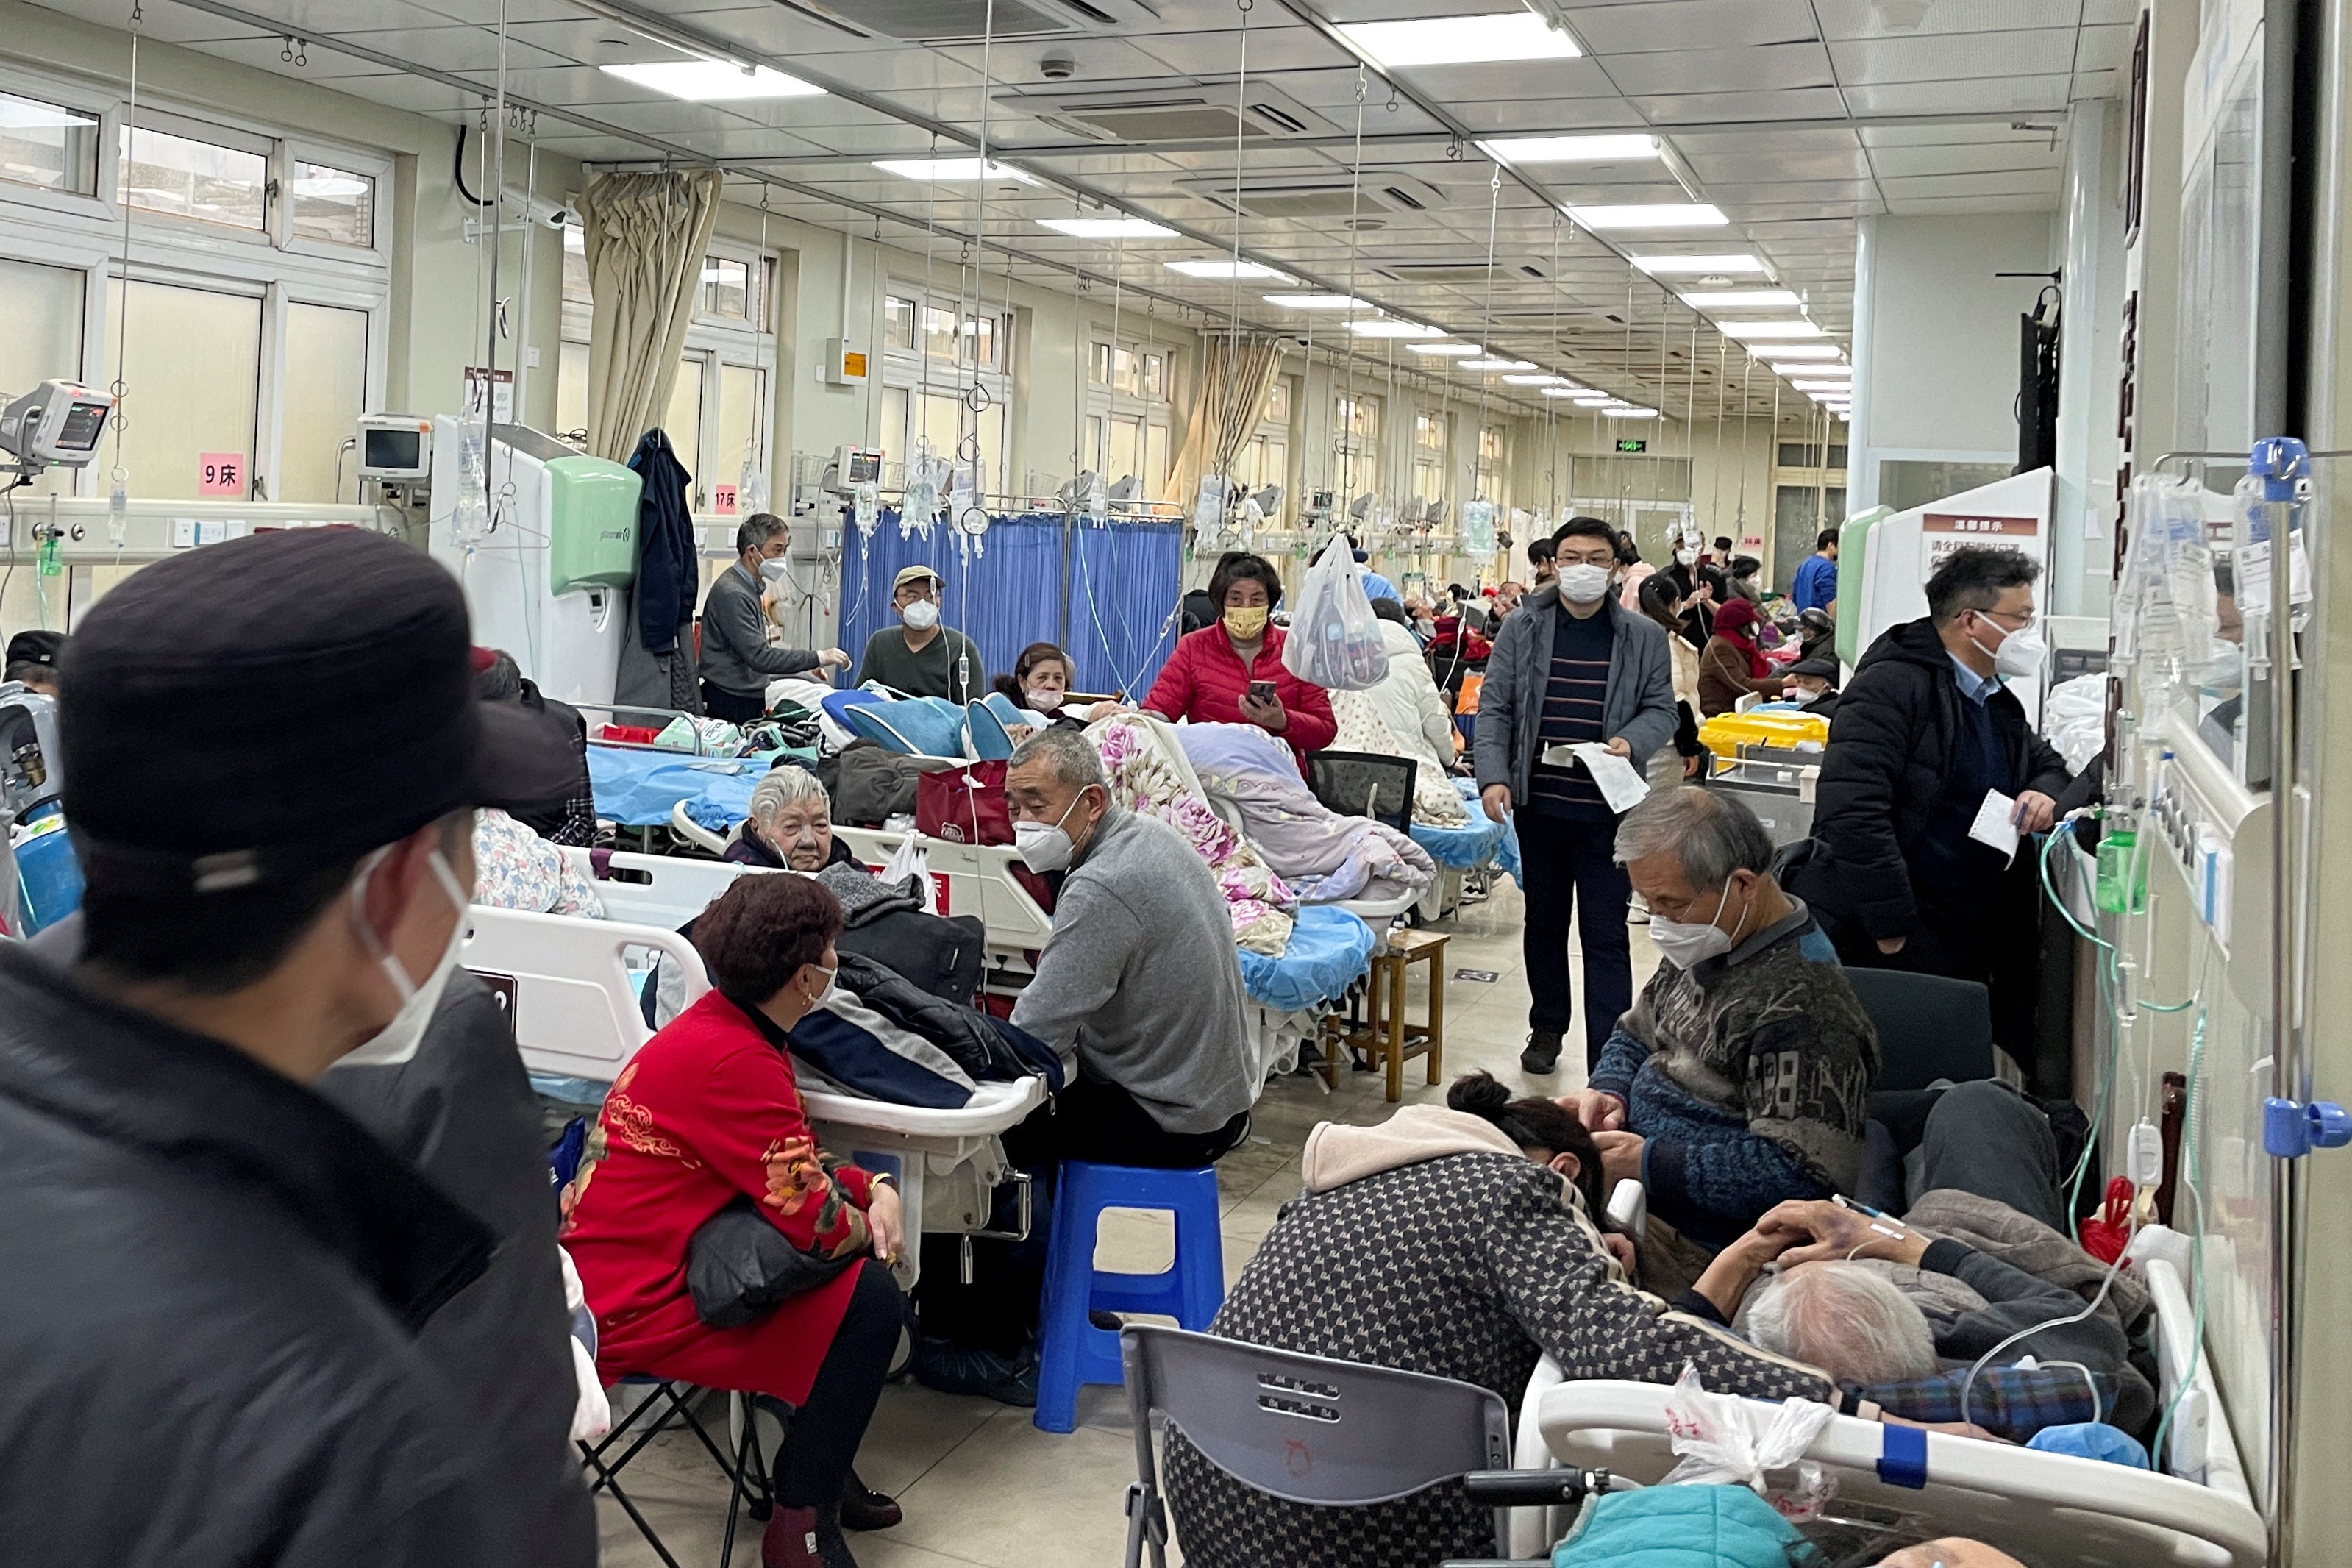 Patients lie on beds in the emergency department of a hospital during a Covid surge across China